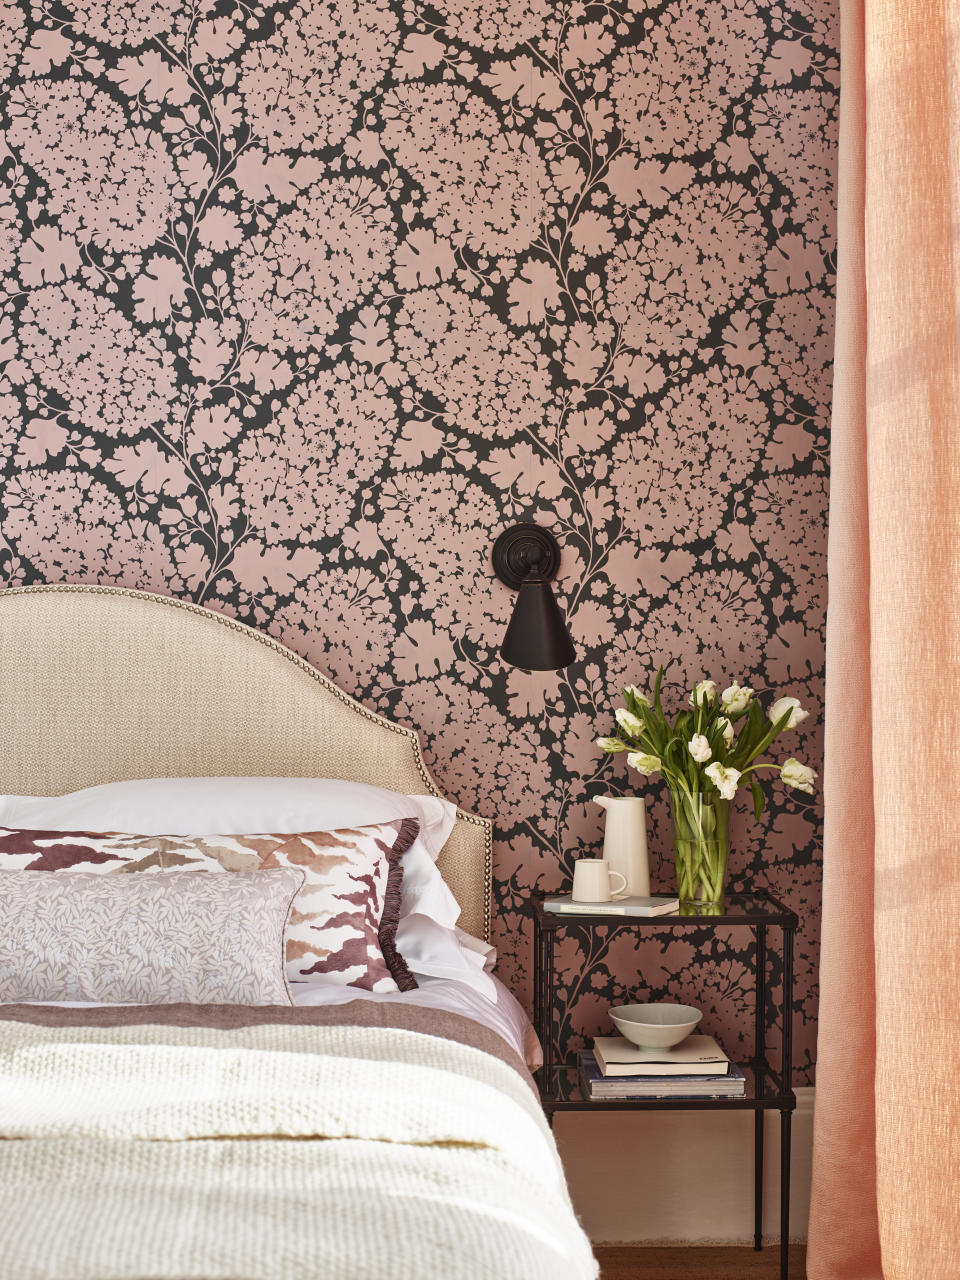 <p> &apos;Wallpaper is a great way to make a statement in a bedroom, either on a single feature wall or on all the walls for full-on drama,&apos; says Tim Walters, managing director, George Spencer Designs. &#x2018;Highly decorative, our Charleston Paisley features a large scale print of a burgeoning hydrangea plant and the Midnight Blush colorway combines a dramatic dark brown with a dusky pink, perfect for creating a glamorous boudoir feel.&#x2019; </p>